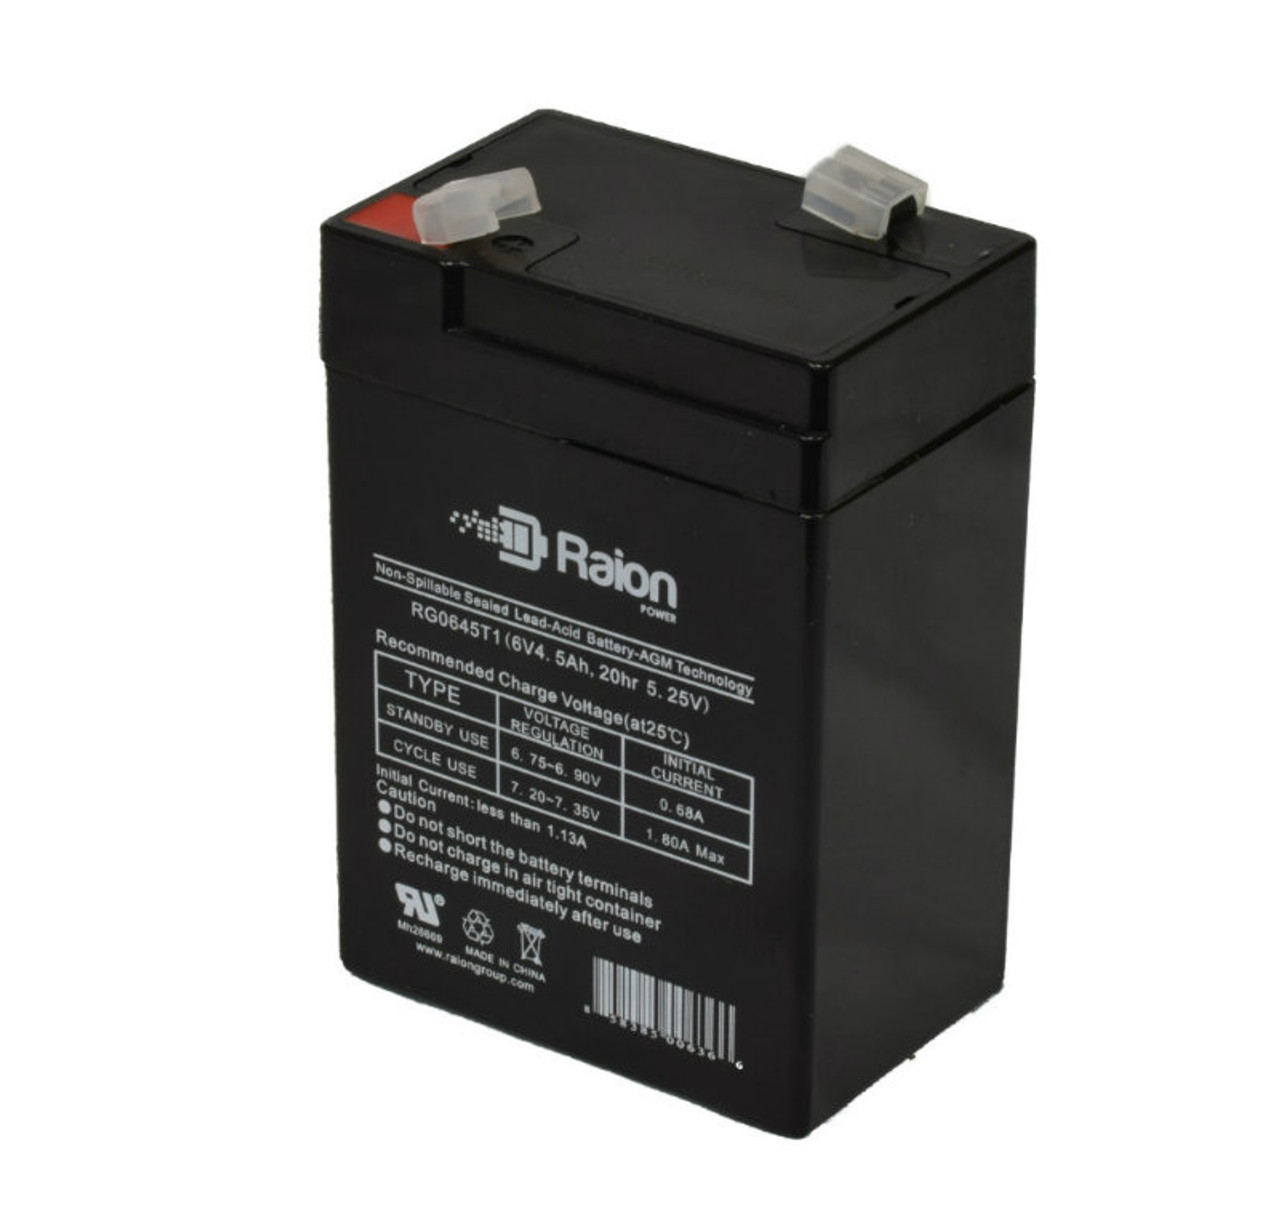 Raion Power RG0645T1 6V 4.5Ah Replacement Battery Cartridge for Lithonia Q4